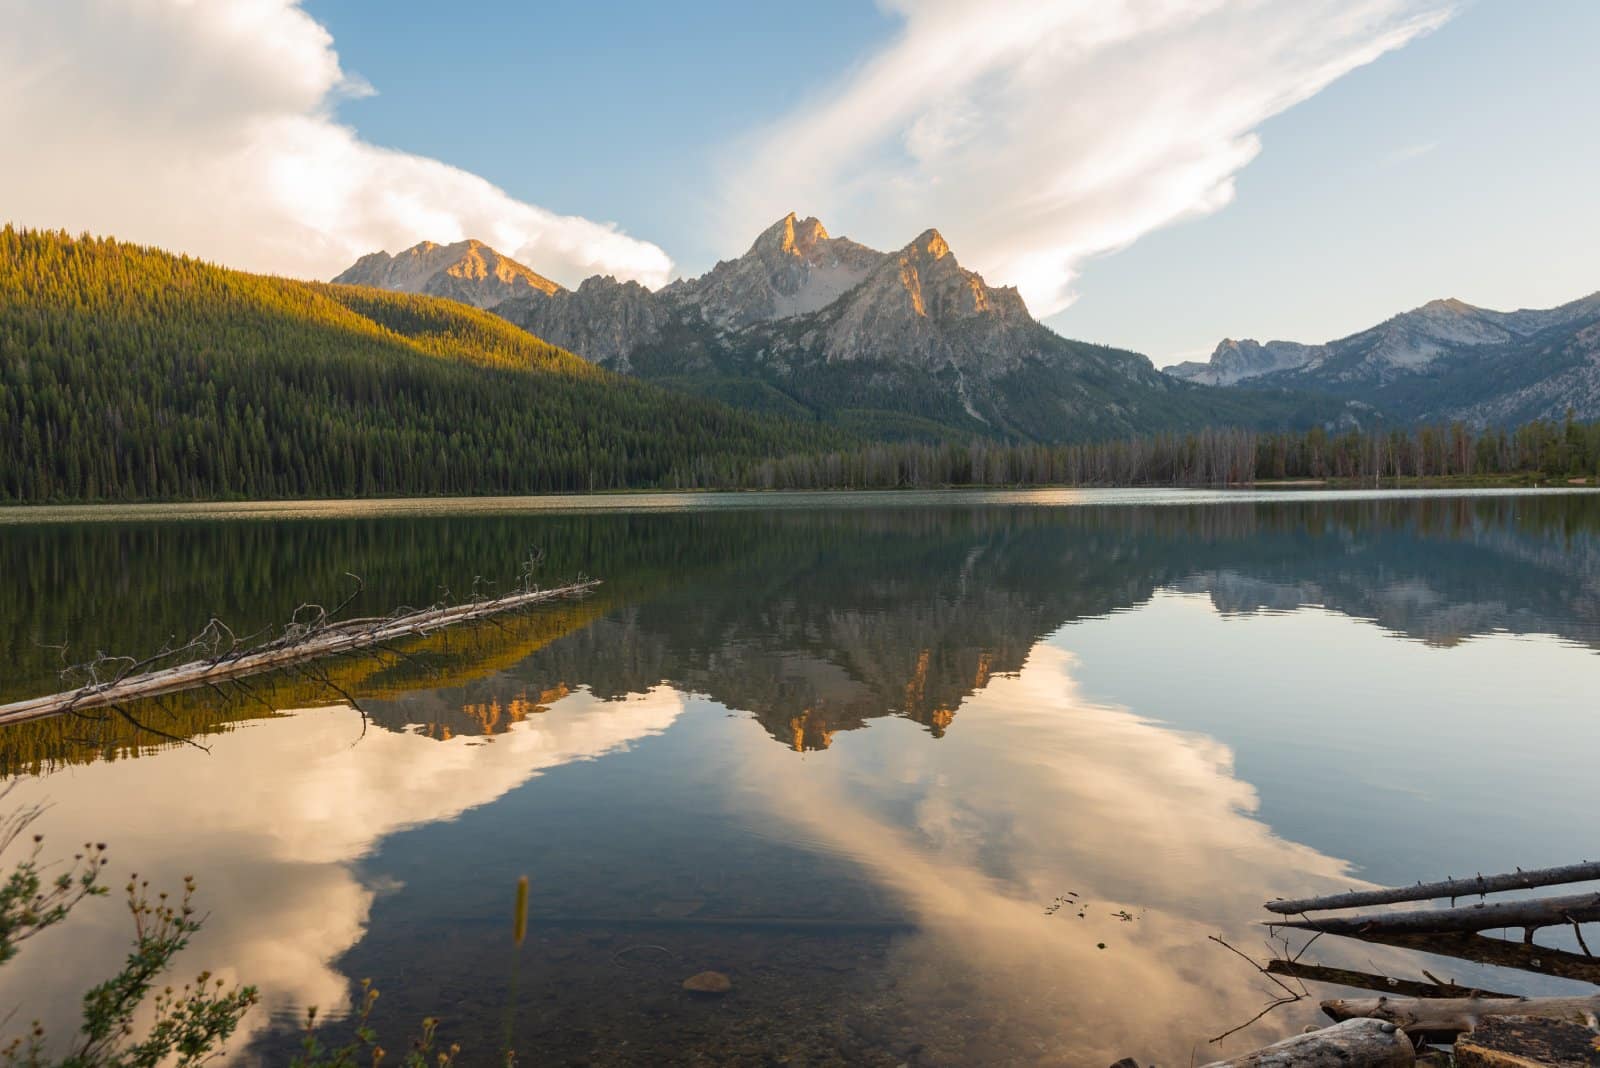 <p class="wp-caption-text">Image Credit: Shutterstock / Aaron Fortin</p>  <p>In the heart of the Sawtooths, this town offers rustic charm and access to wilderness. Accommodation ranges from camping to cozy lodges, making Stanley a great base for exploring the Idaho backcountry on any budget.</p>